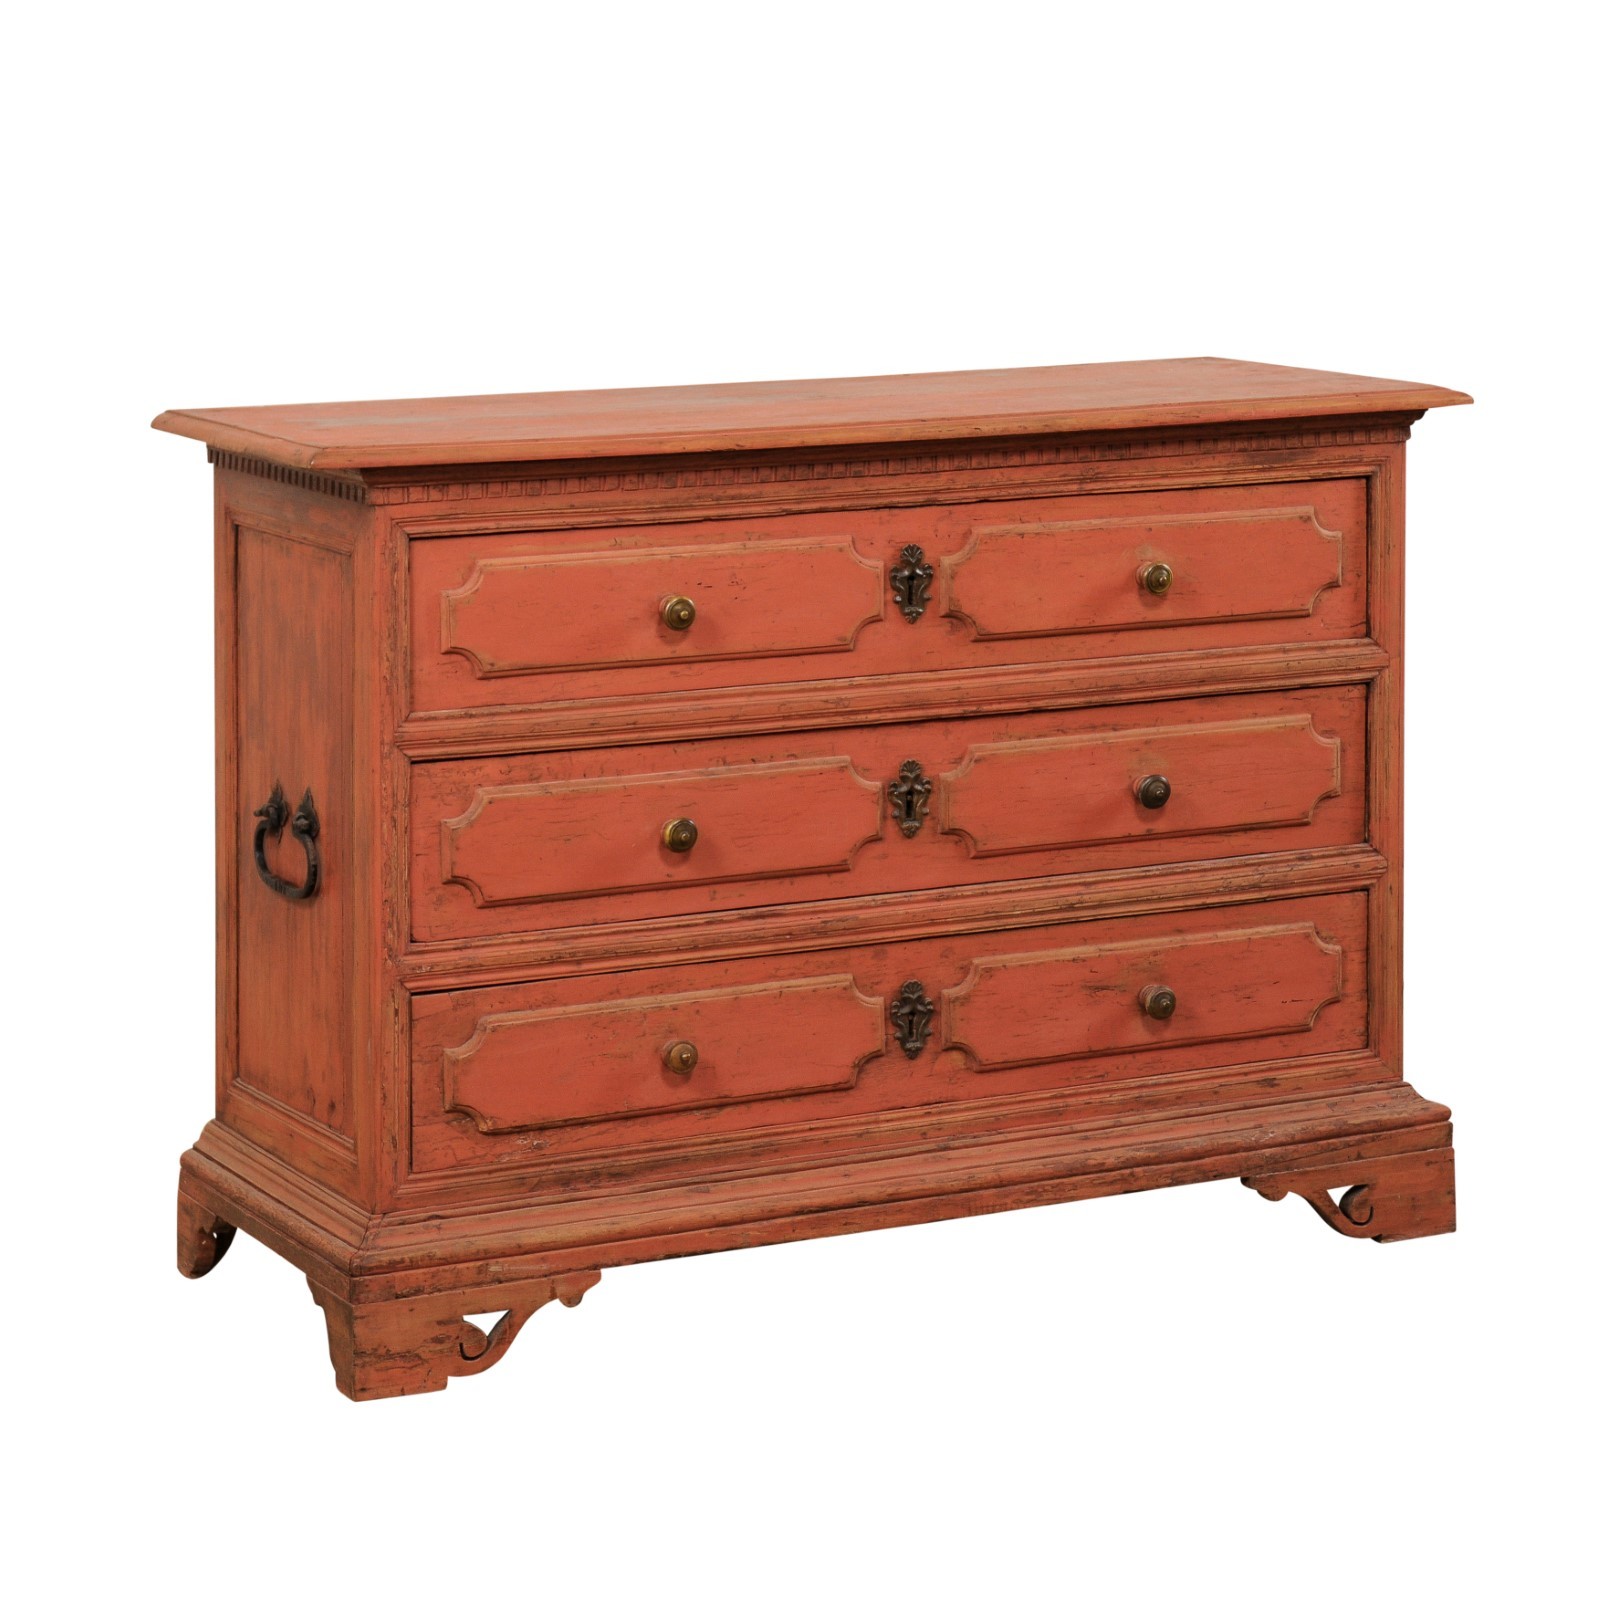 Antique Italian Commode in Muted Red Hues 